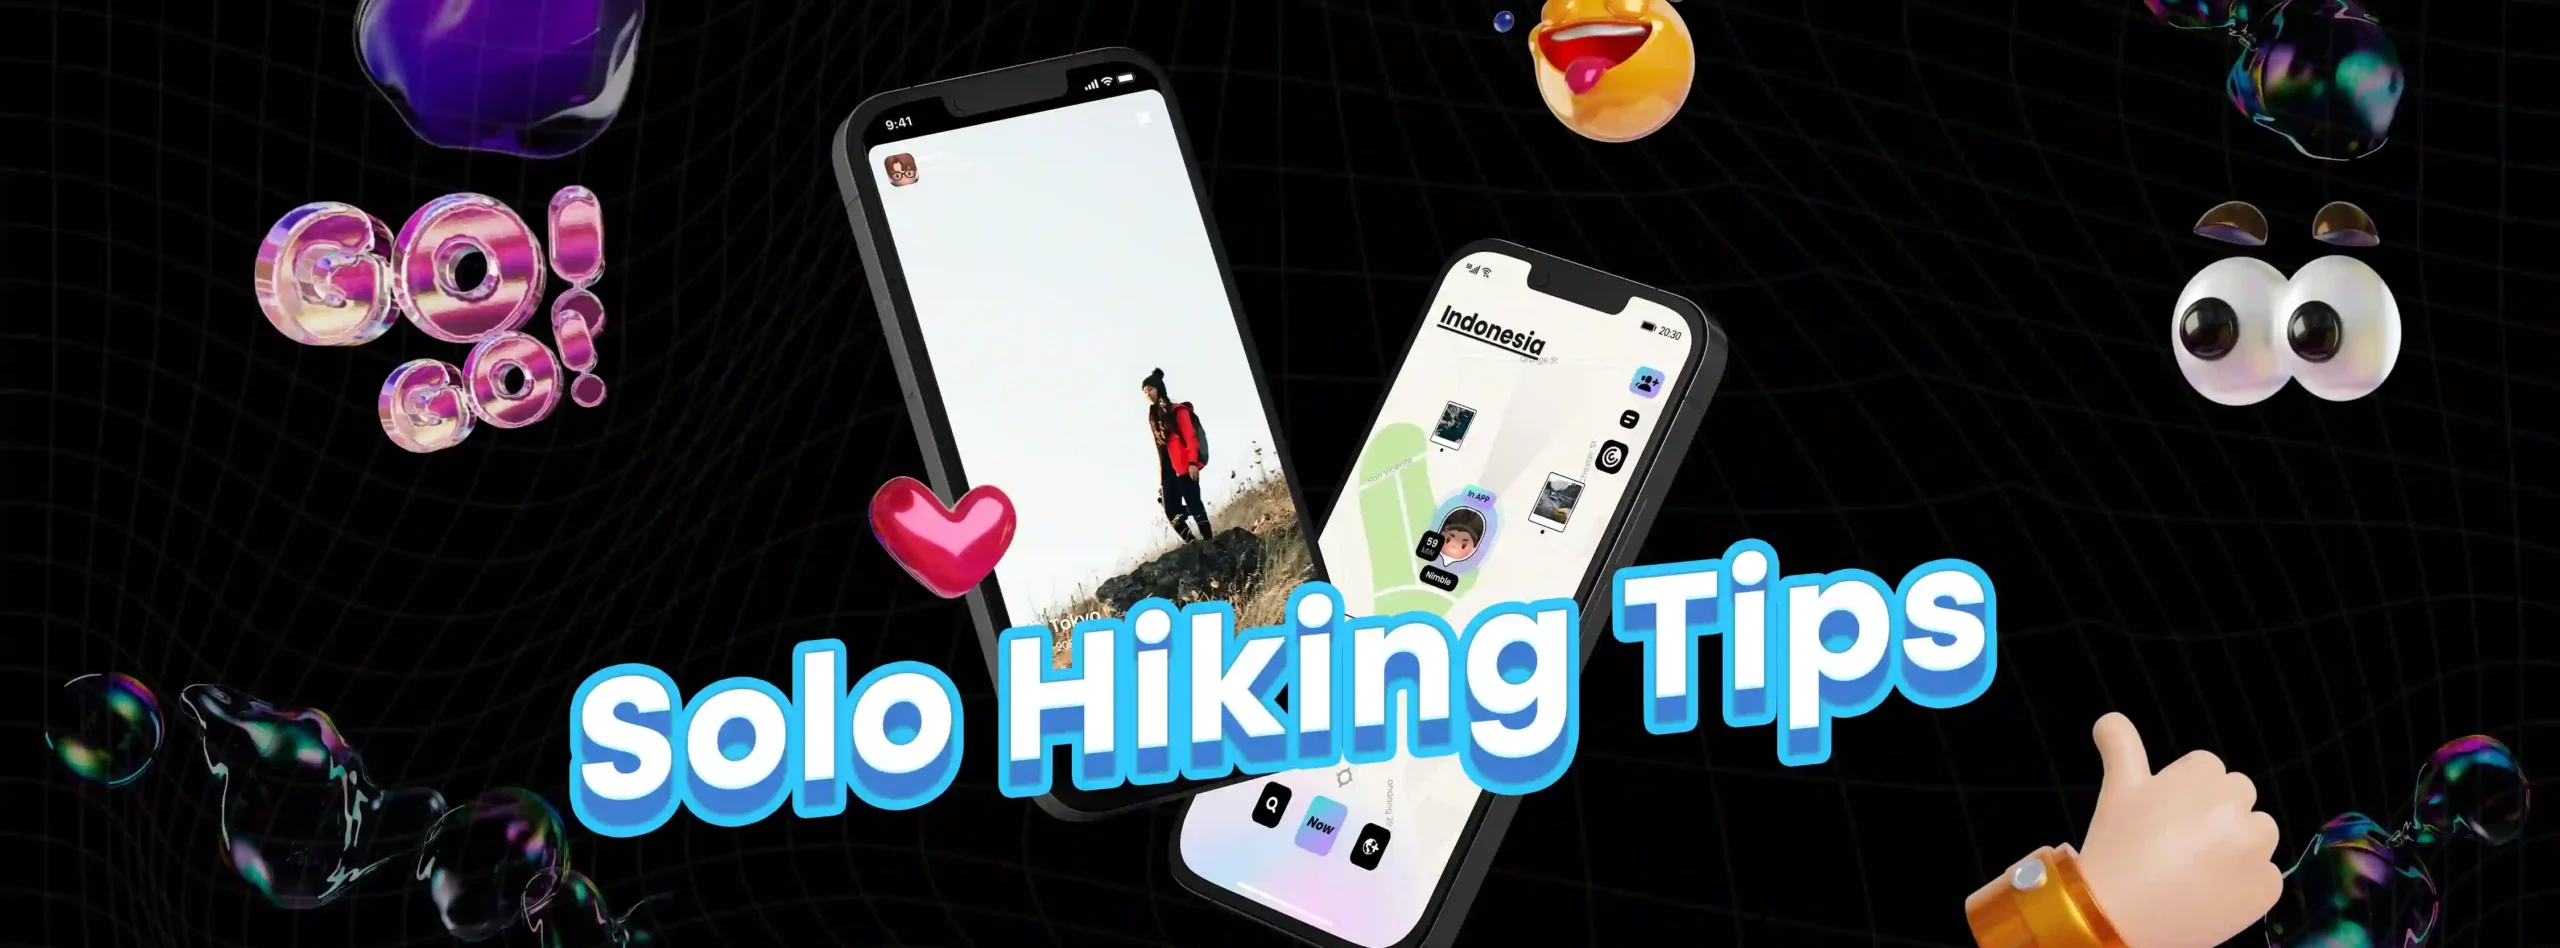 solo hiking tips